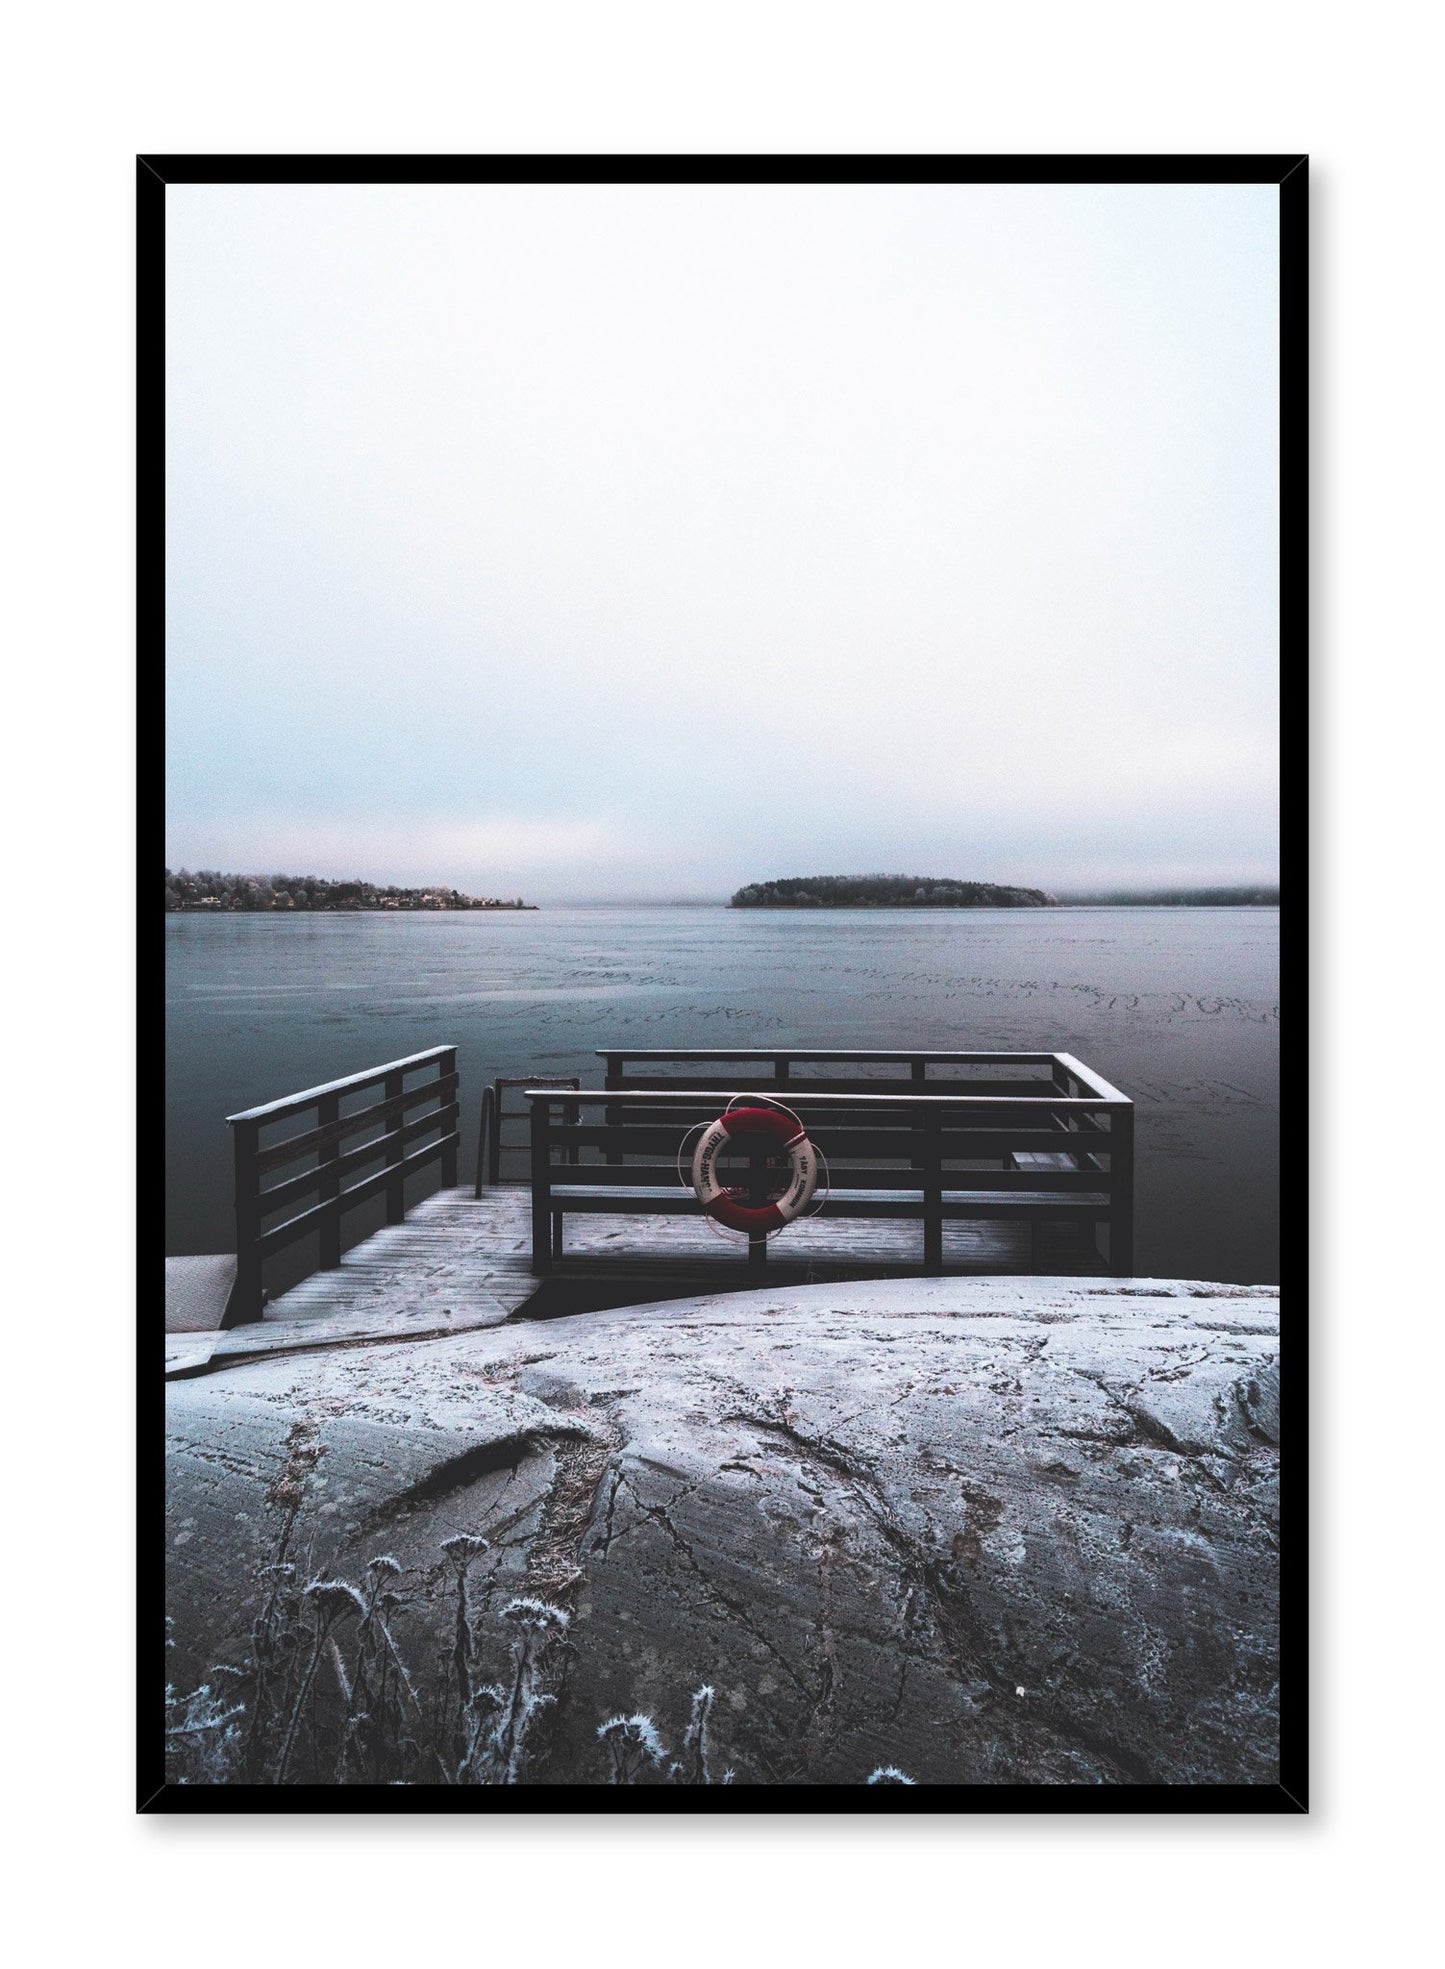 Minimalist design poster by Opposite Wall with winter lake photography